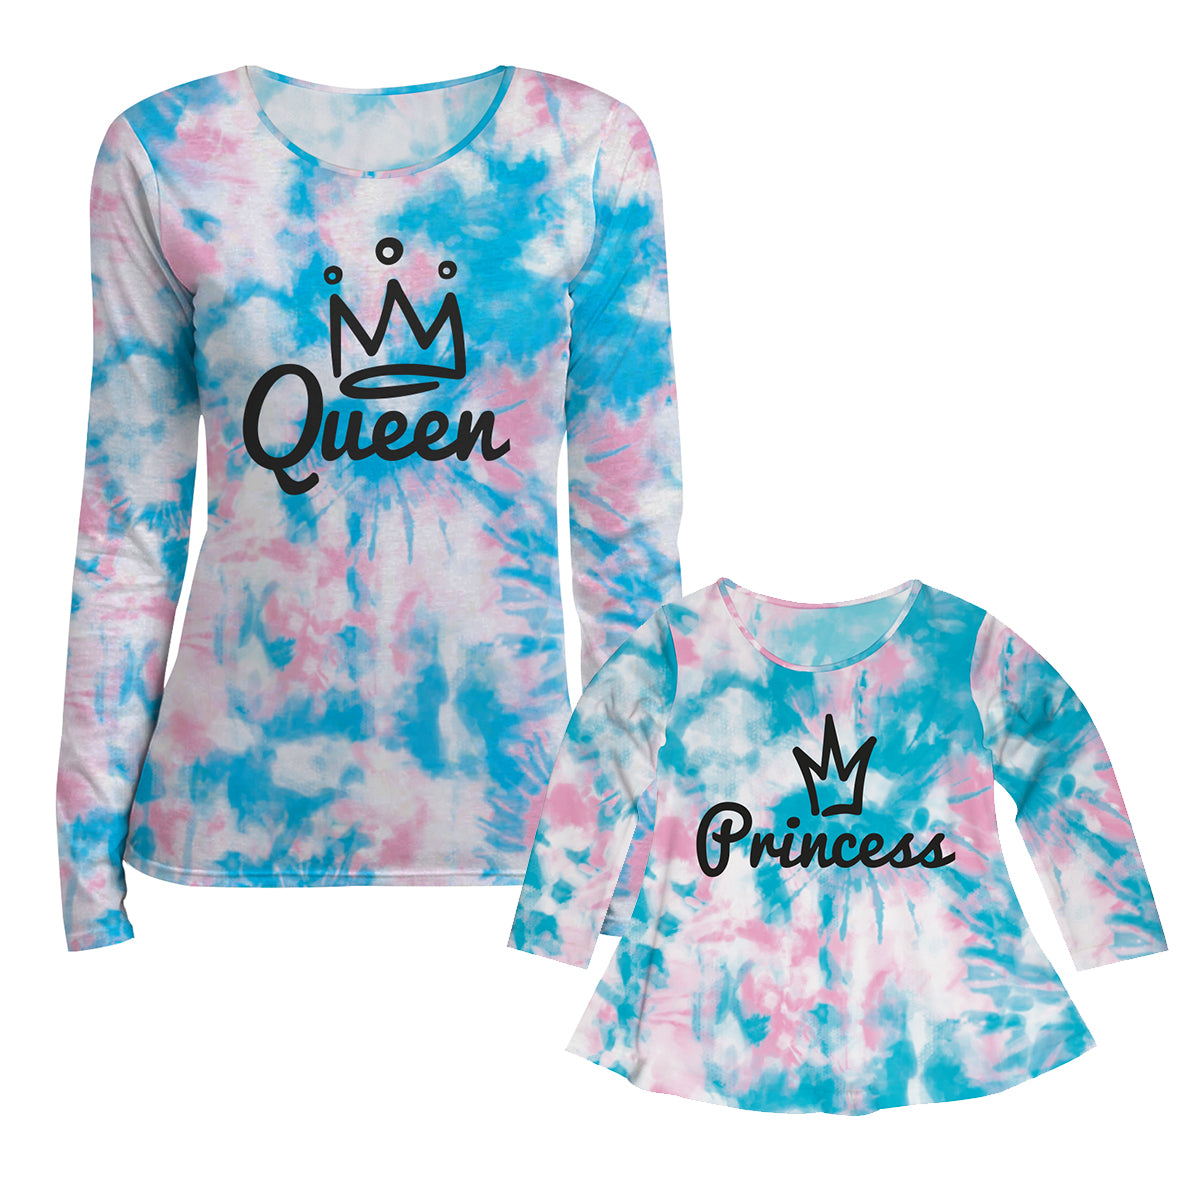 Crown Princess Pink and Blue Tie Dye Long Sleeve Laurie Top - Wimziy&Co.